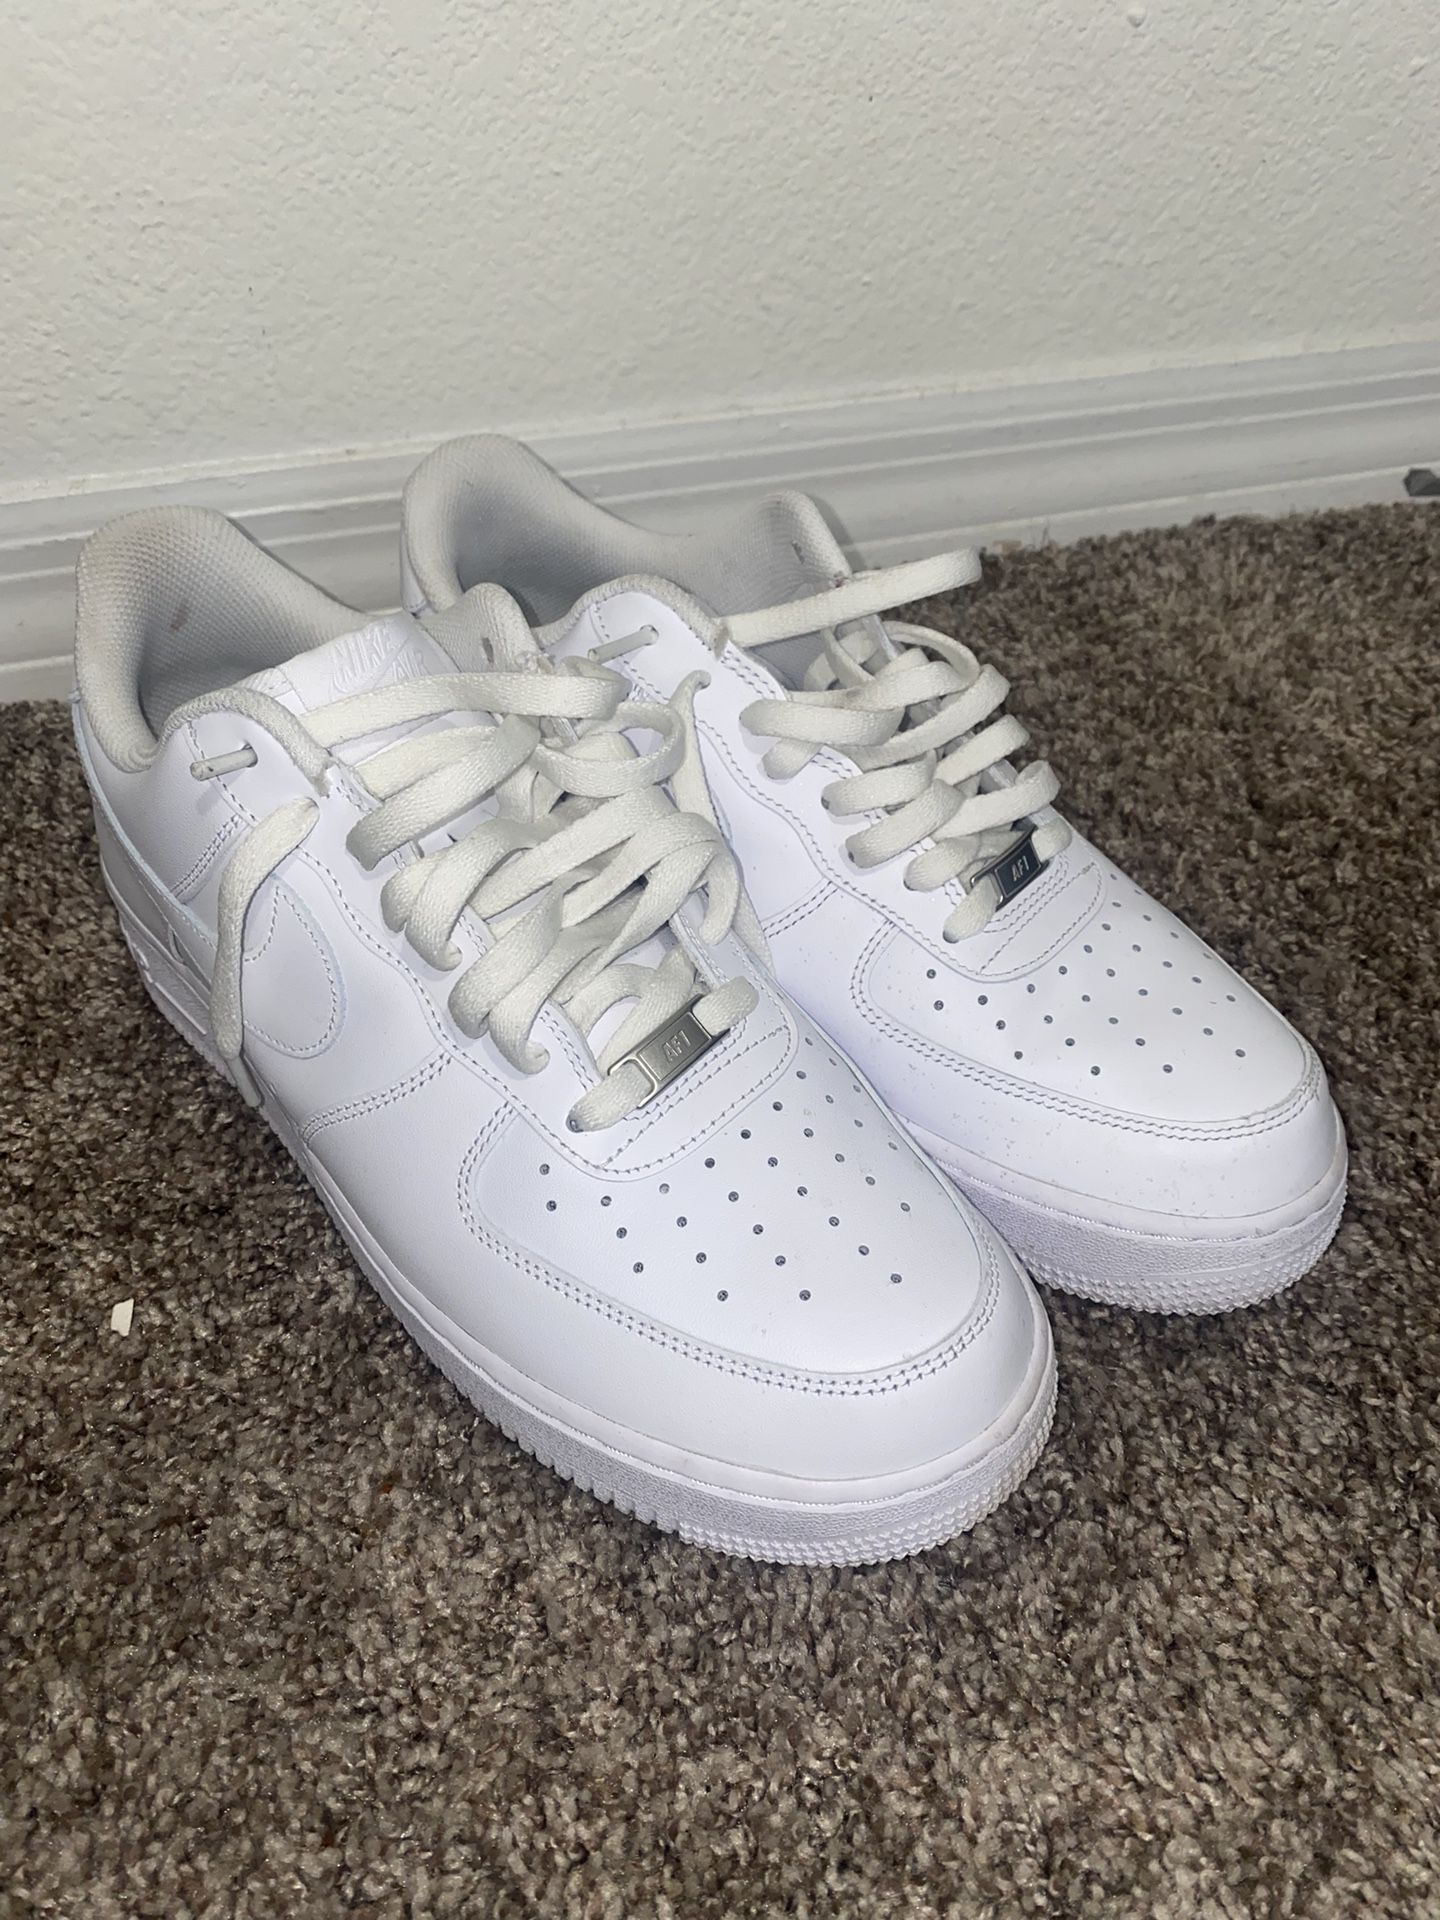 All White Air Force 1’s